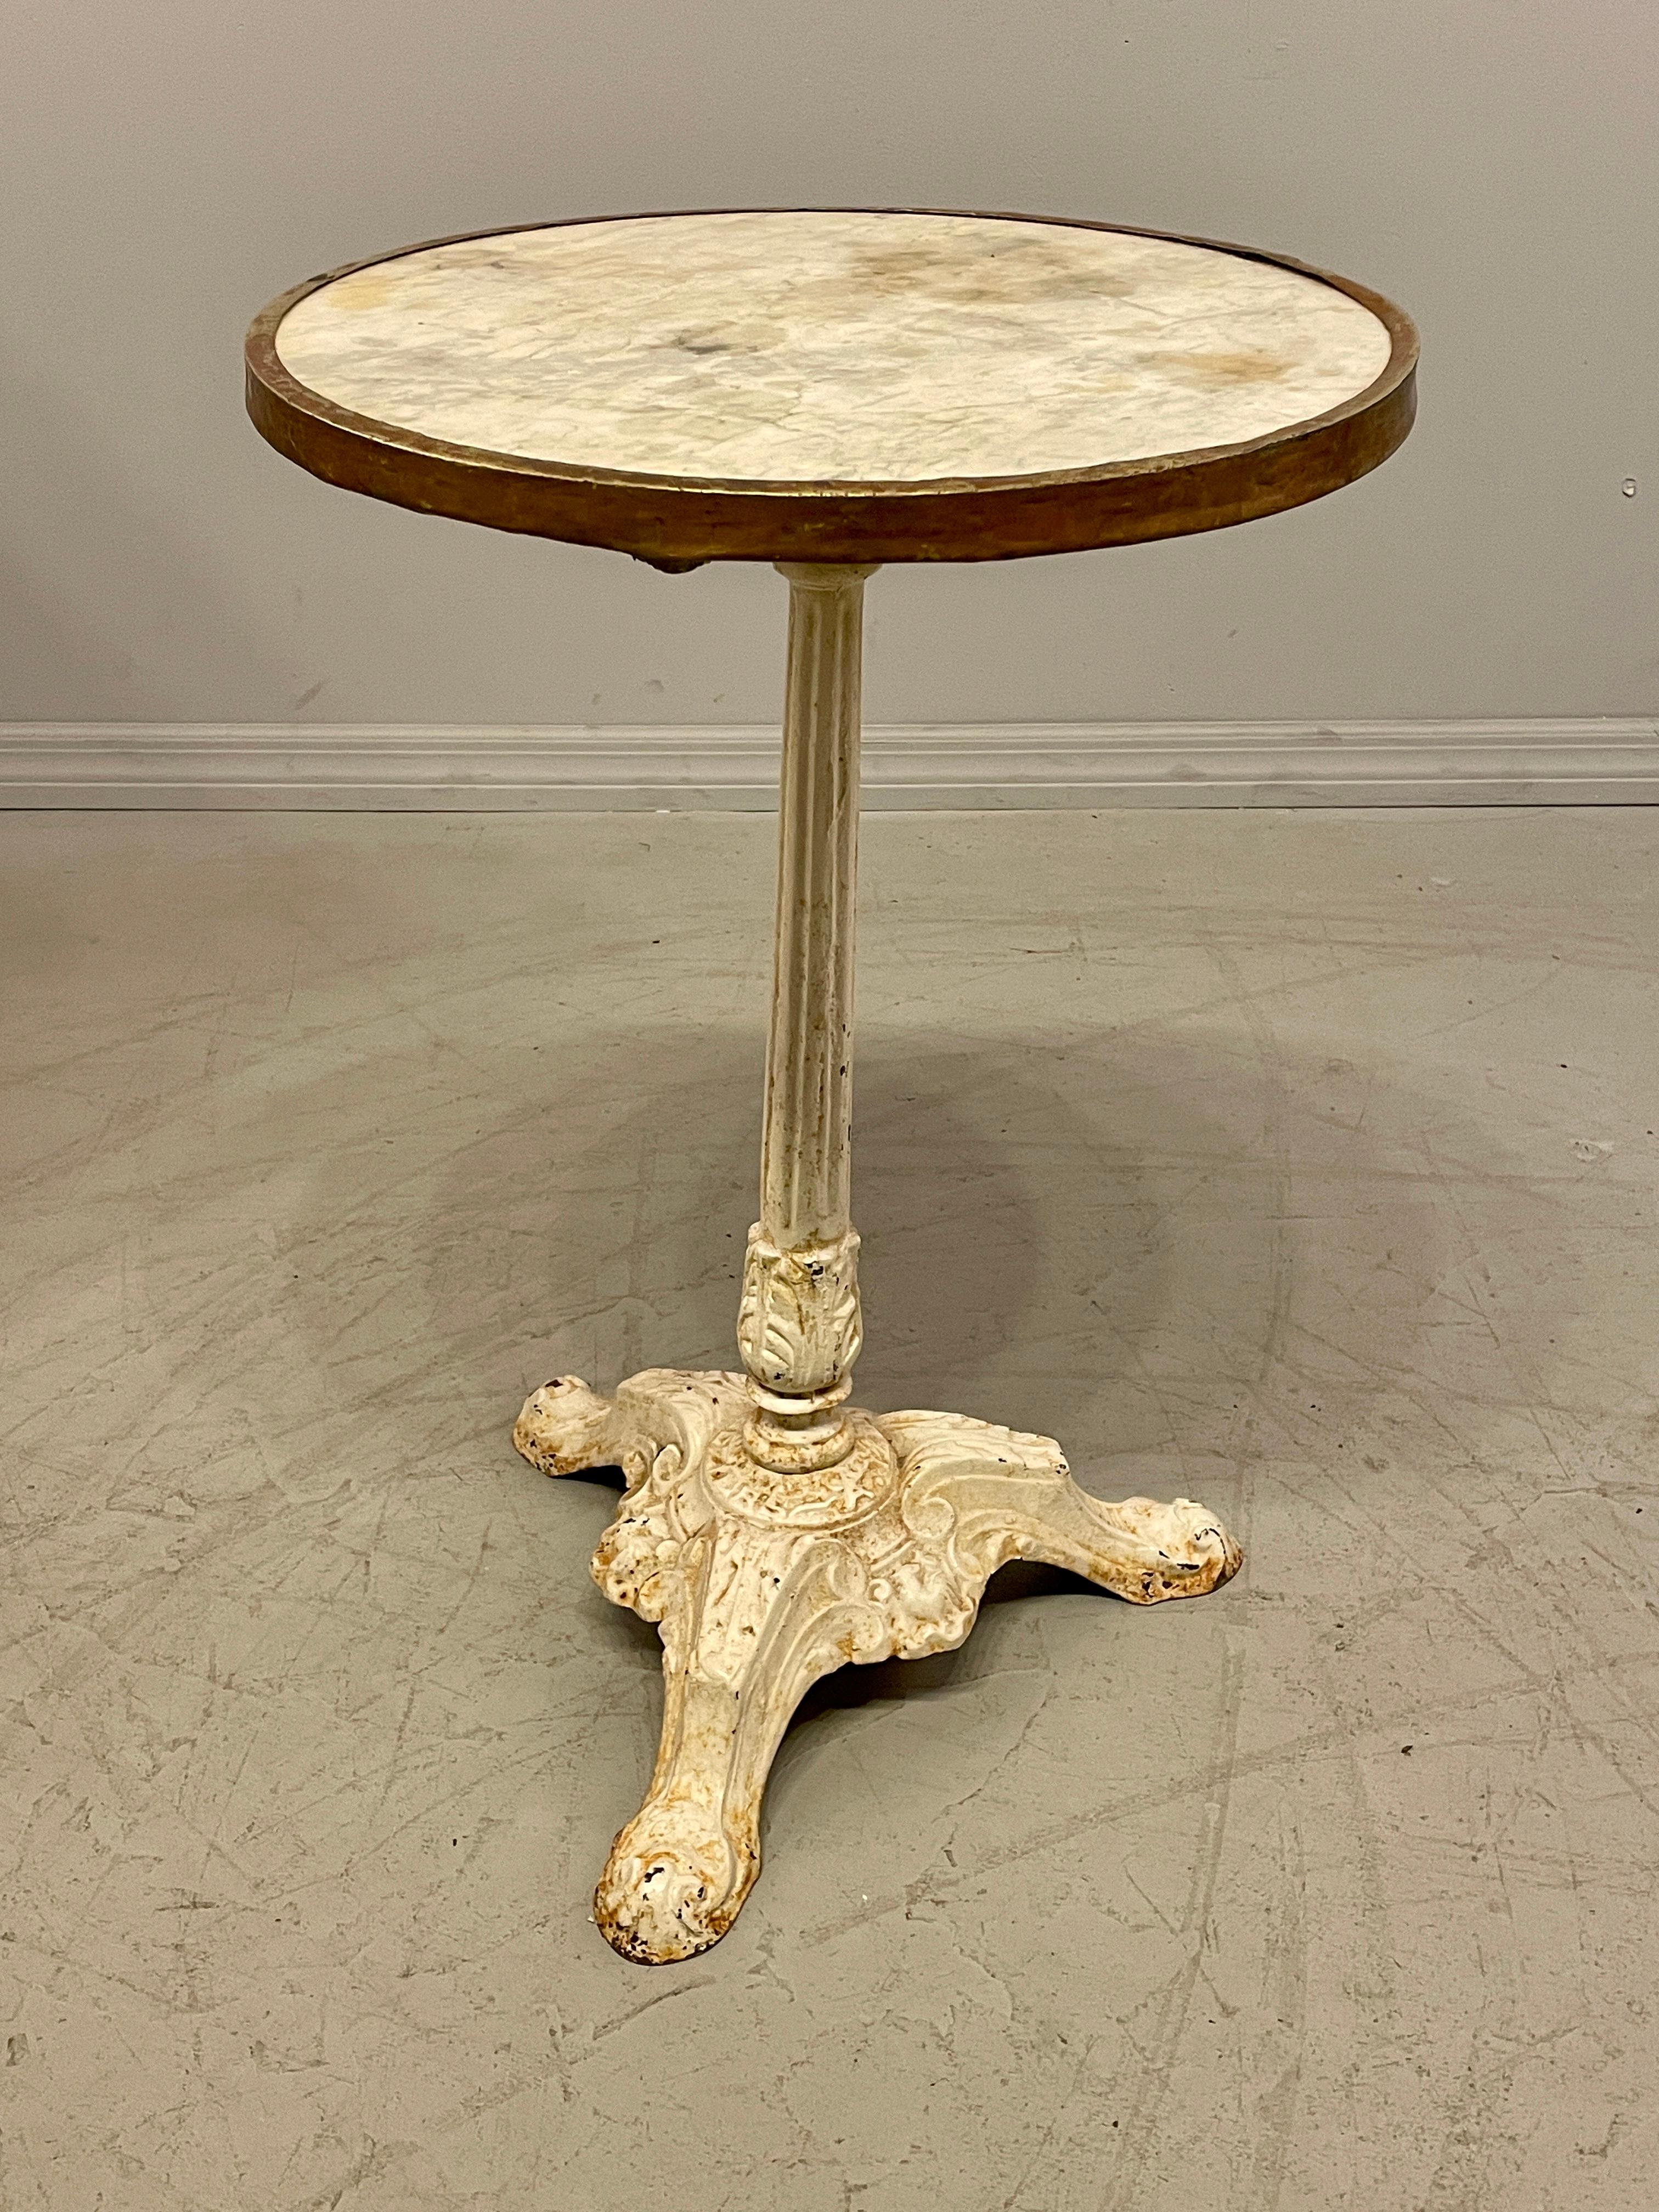 A 19th century French heavy cast iron bistro table. White marble top with brass band around the perimeter. Beautiful patina. All original. Circa 1870-1890  28